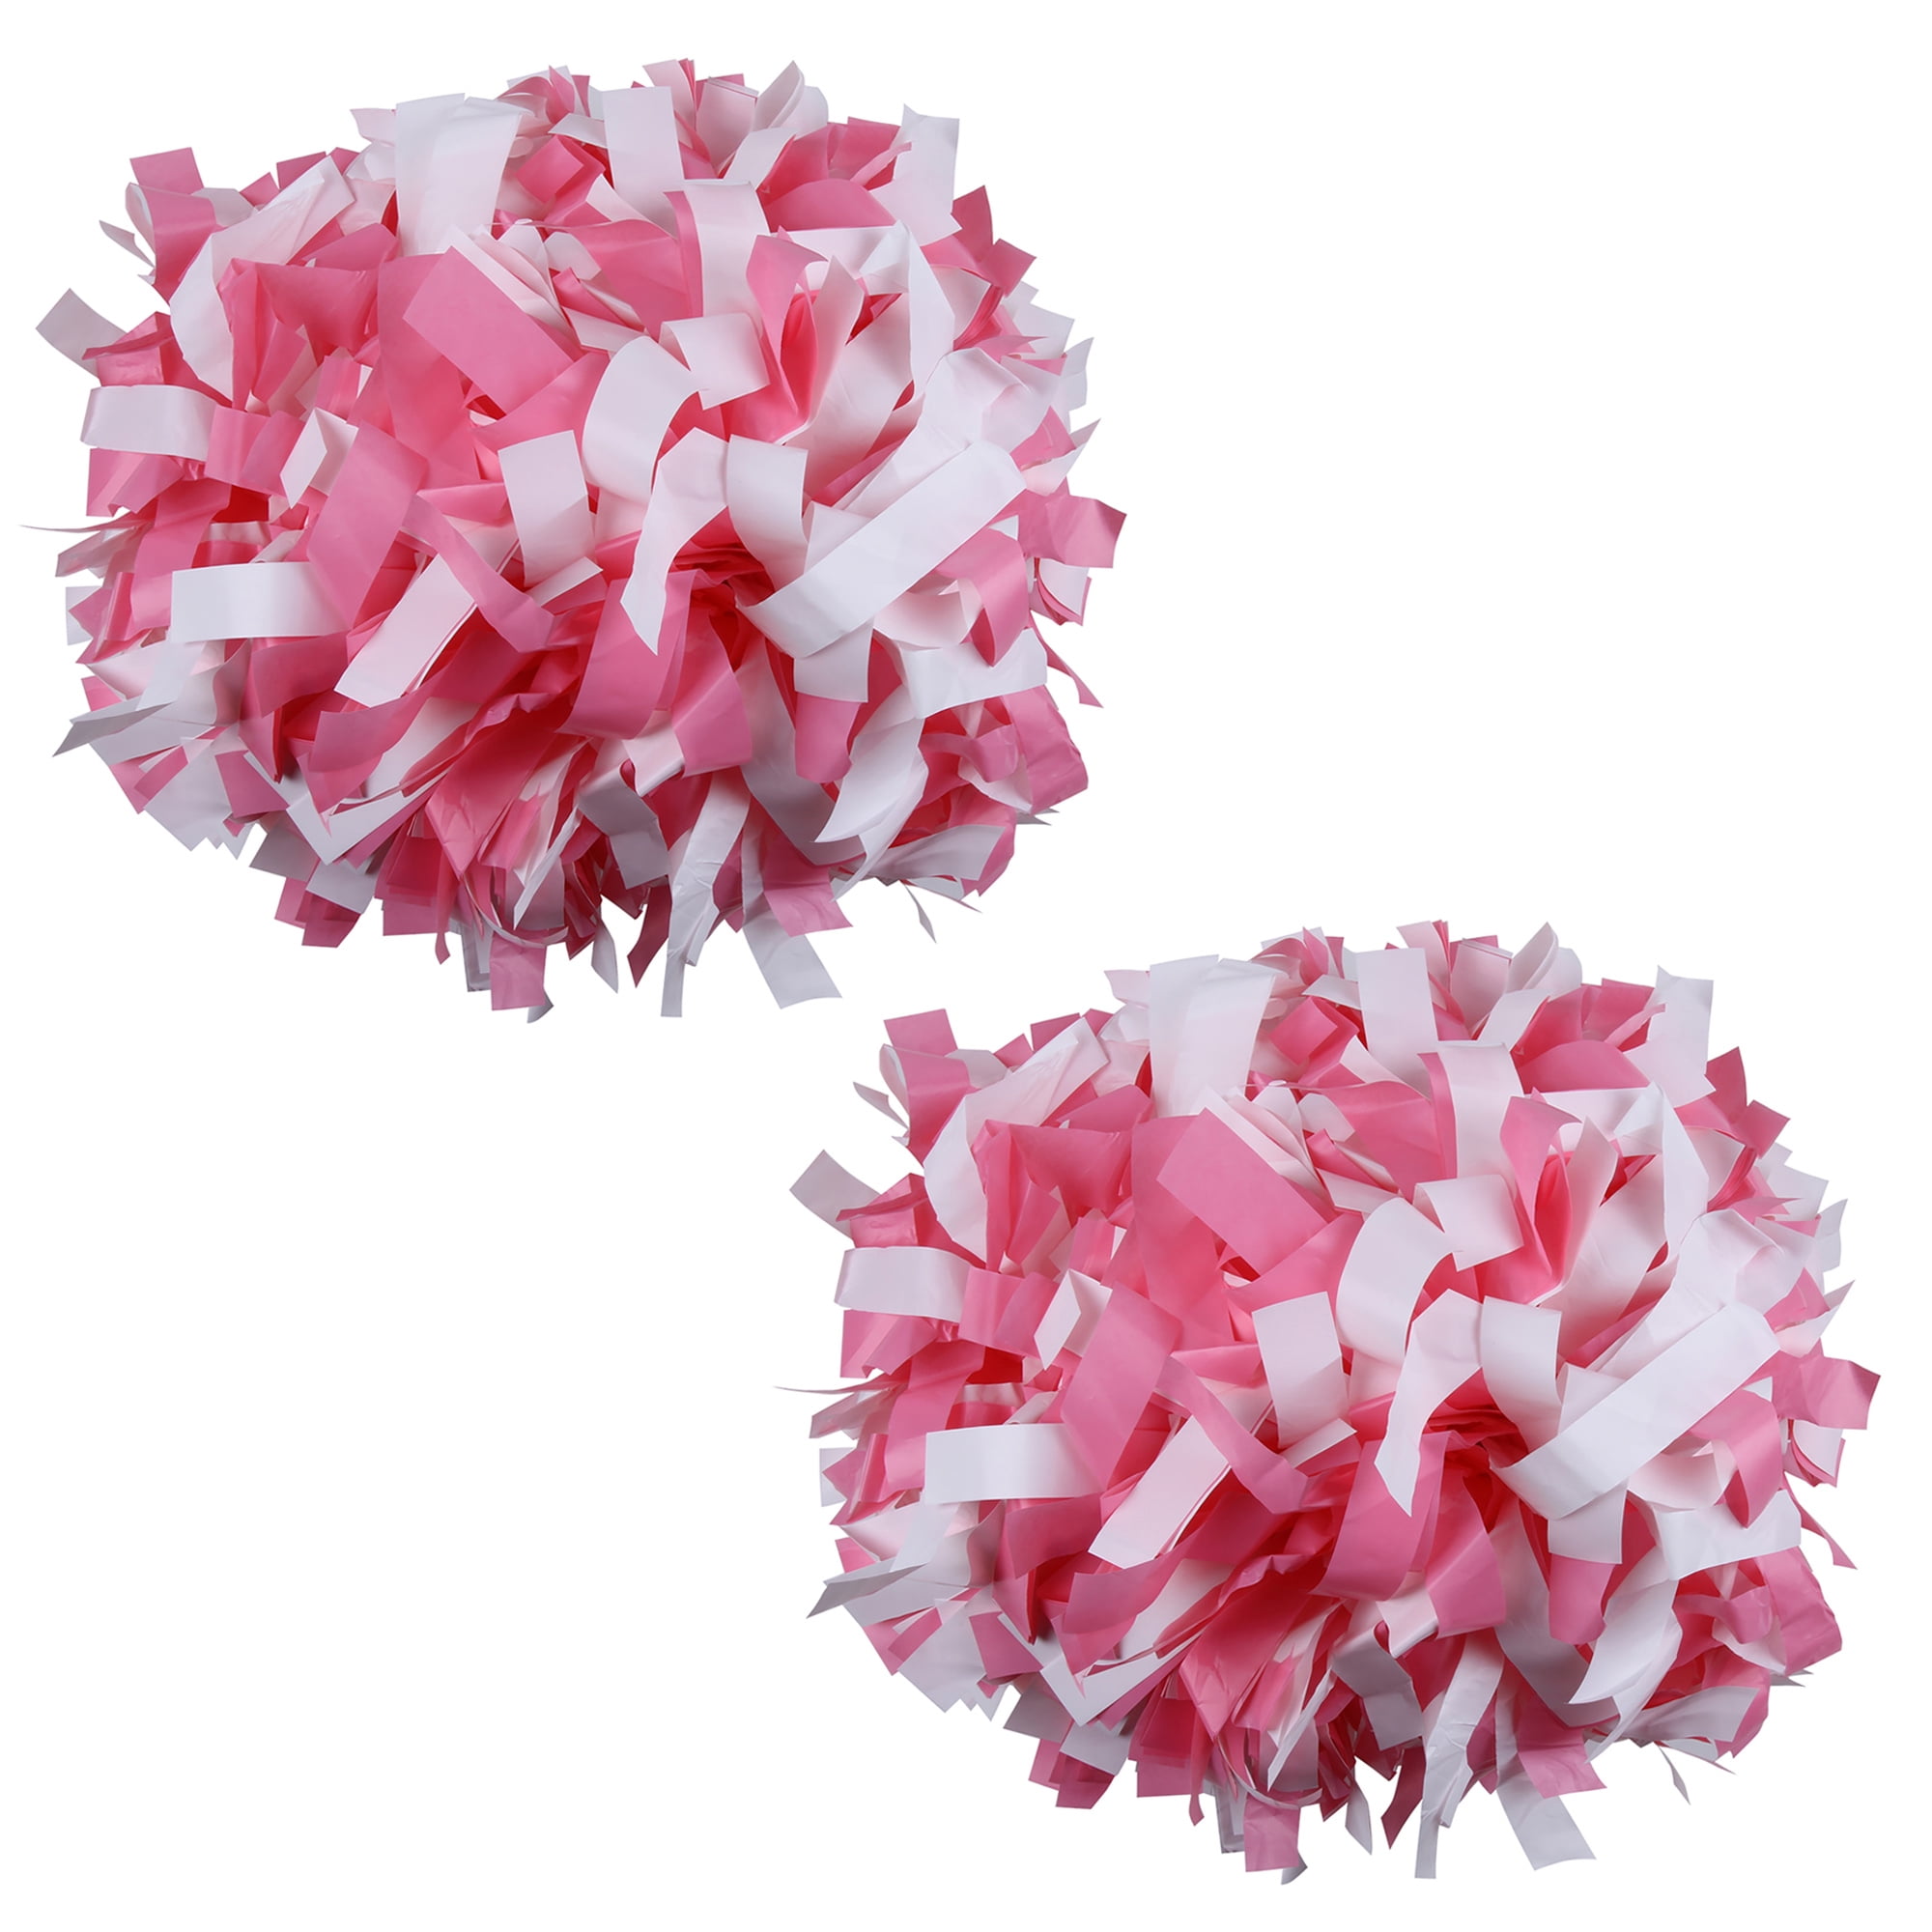 New and used Cheerleading Pom Poms for sale